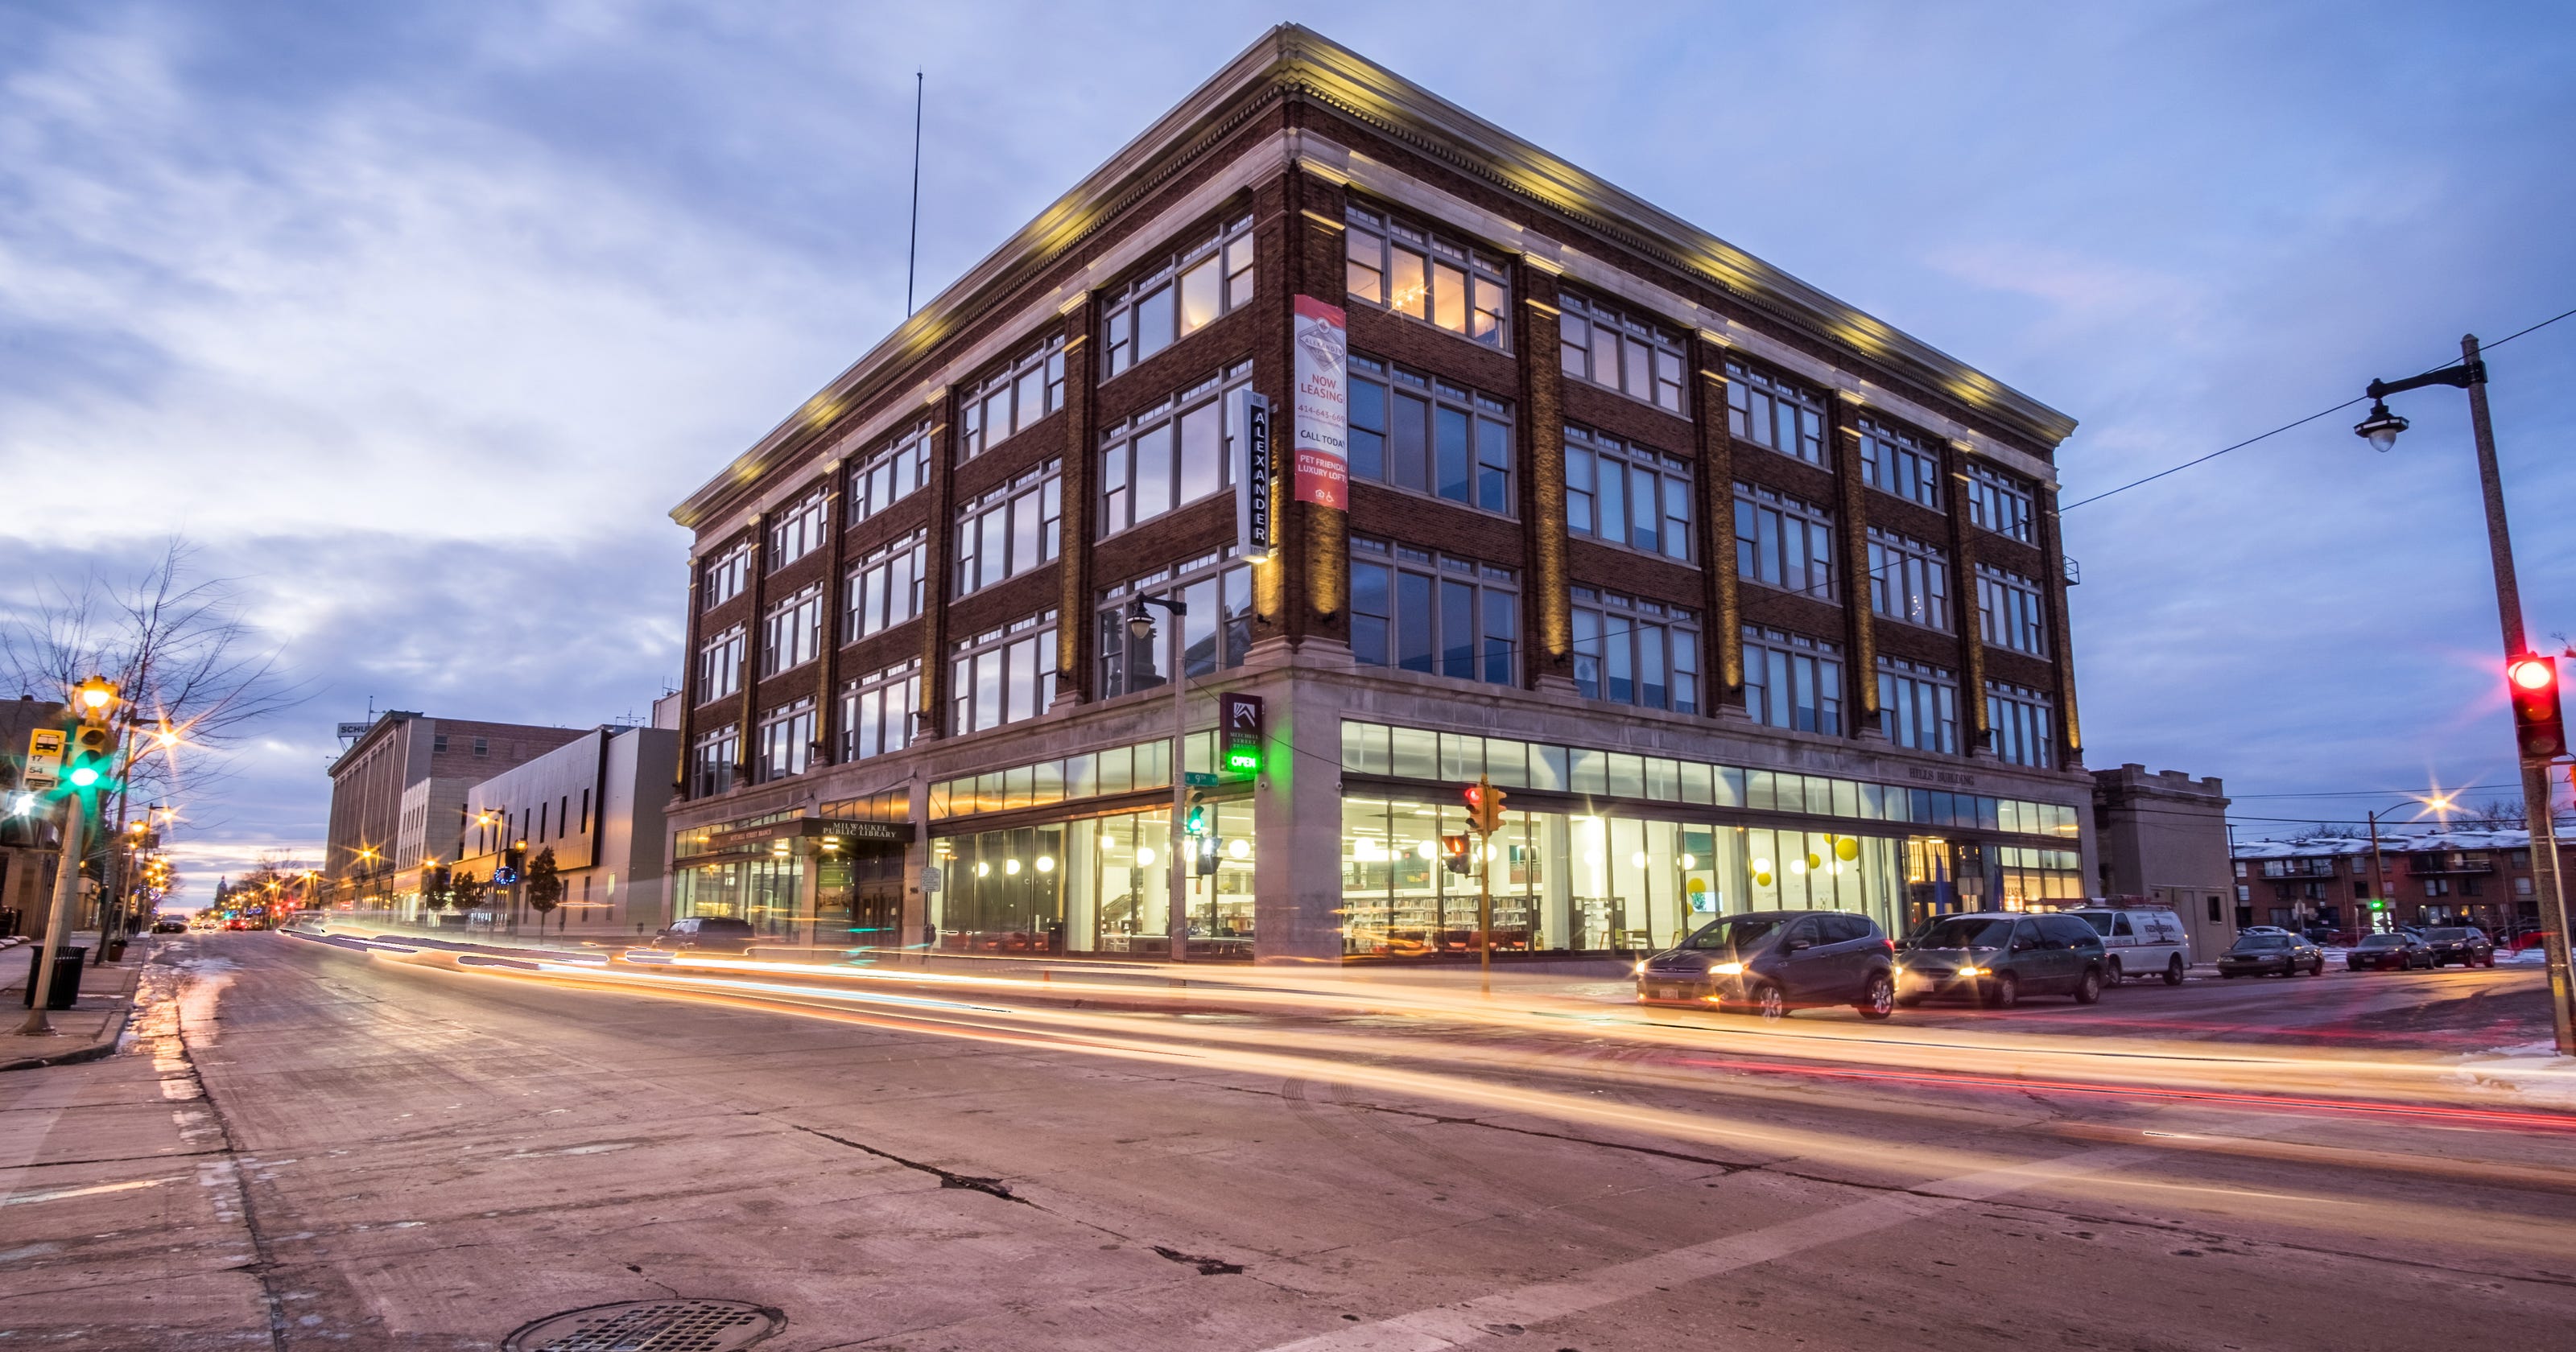 Have a look at some sites in Doors Open Milwaukee 2019